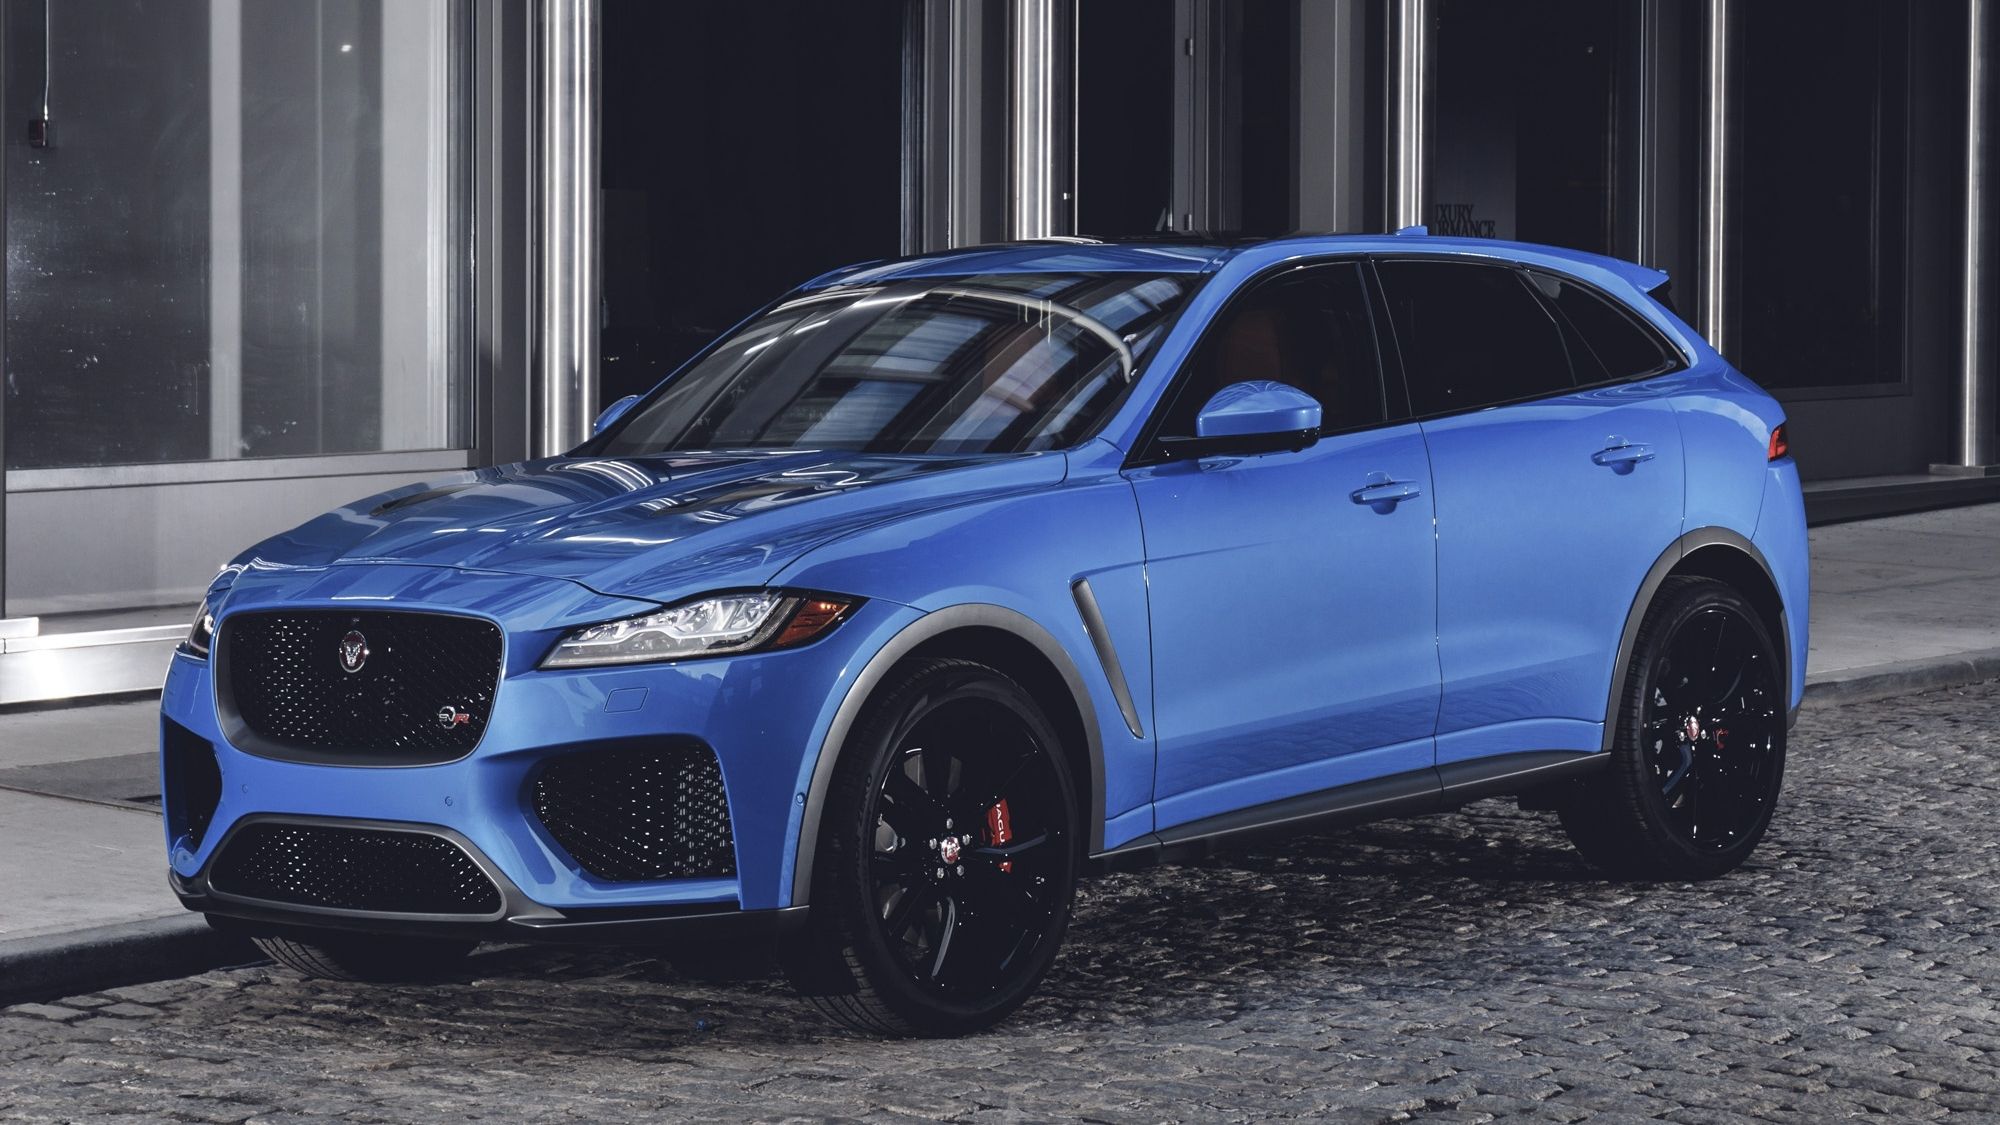 2018 The Jaguar F-Pace SVR Will Make You Forget about the Mercedes-AMG GLC 63 and the Upcoming BMW X3 M